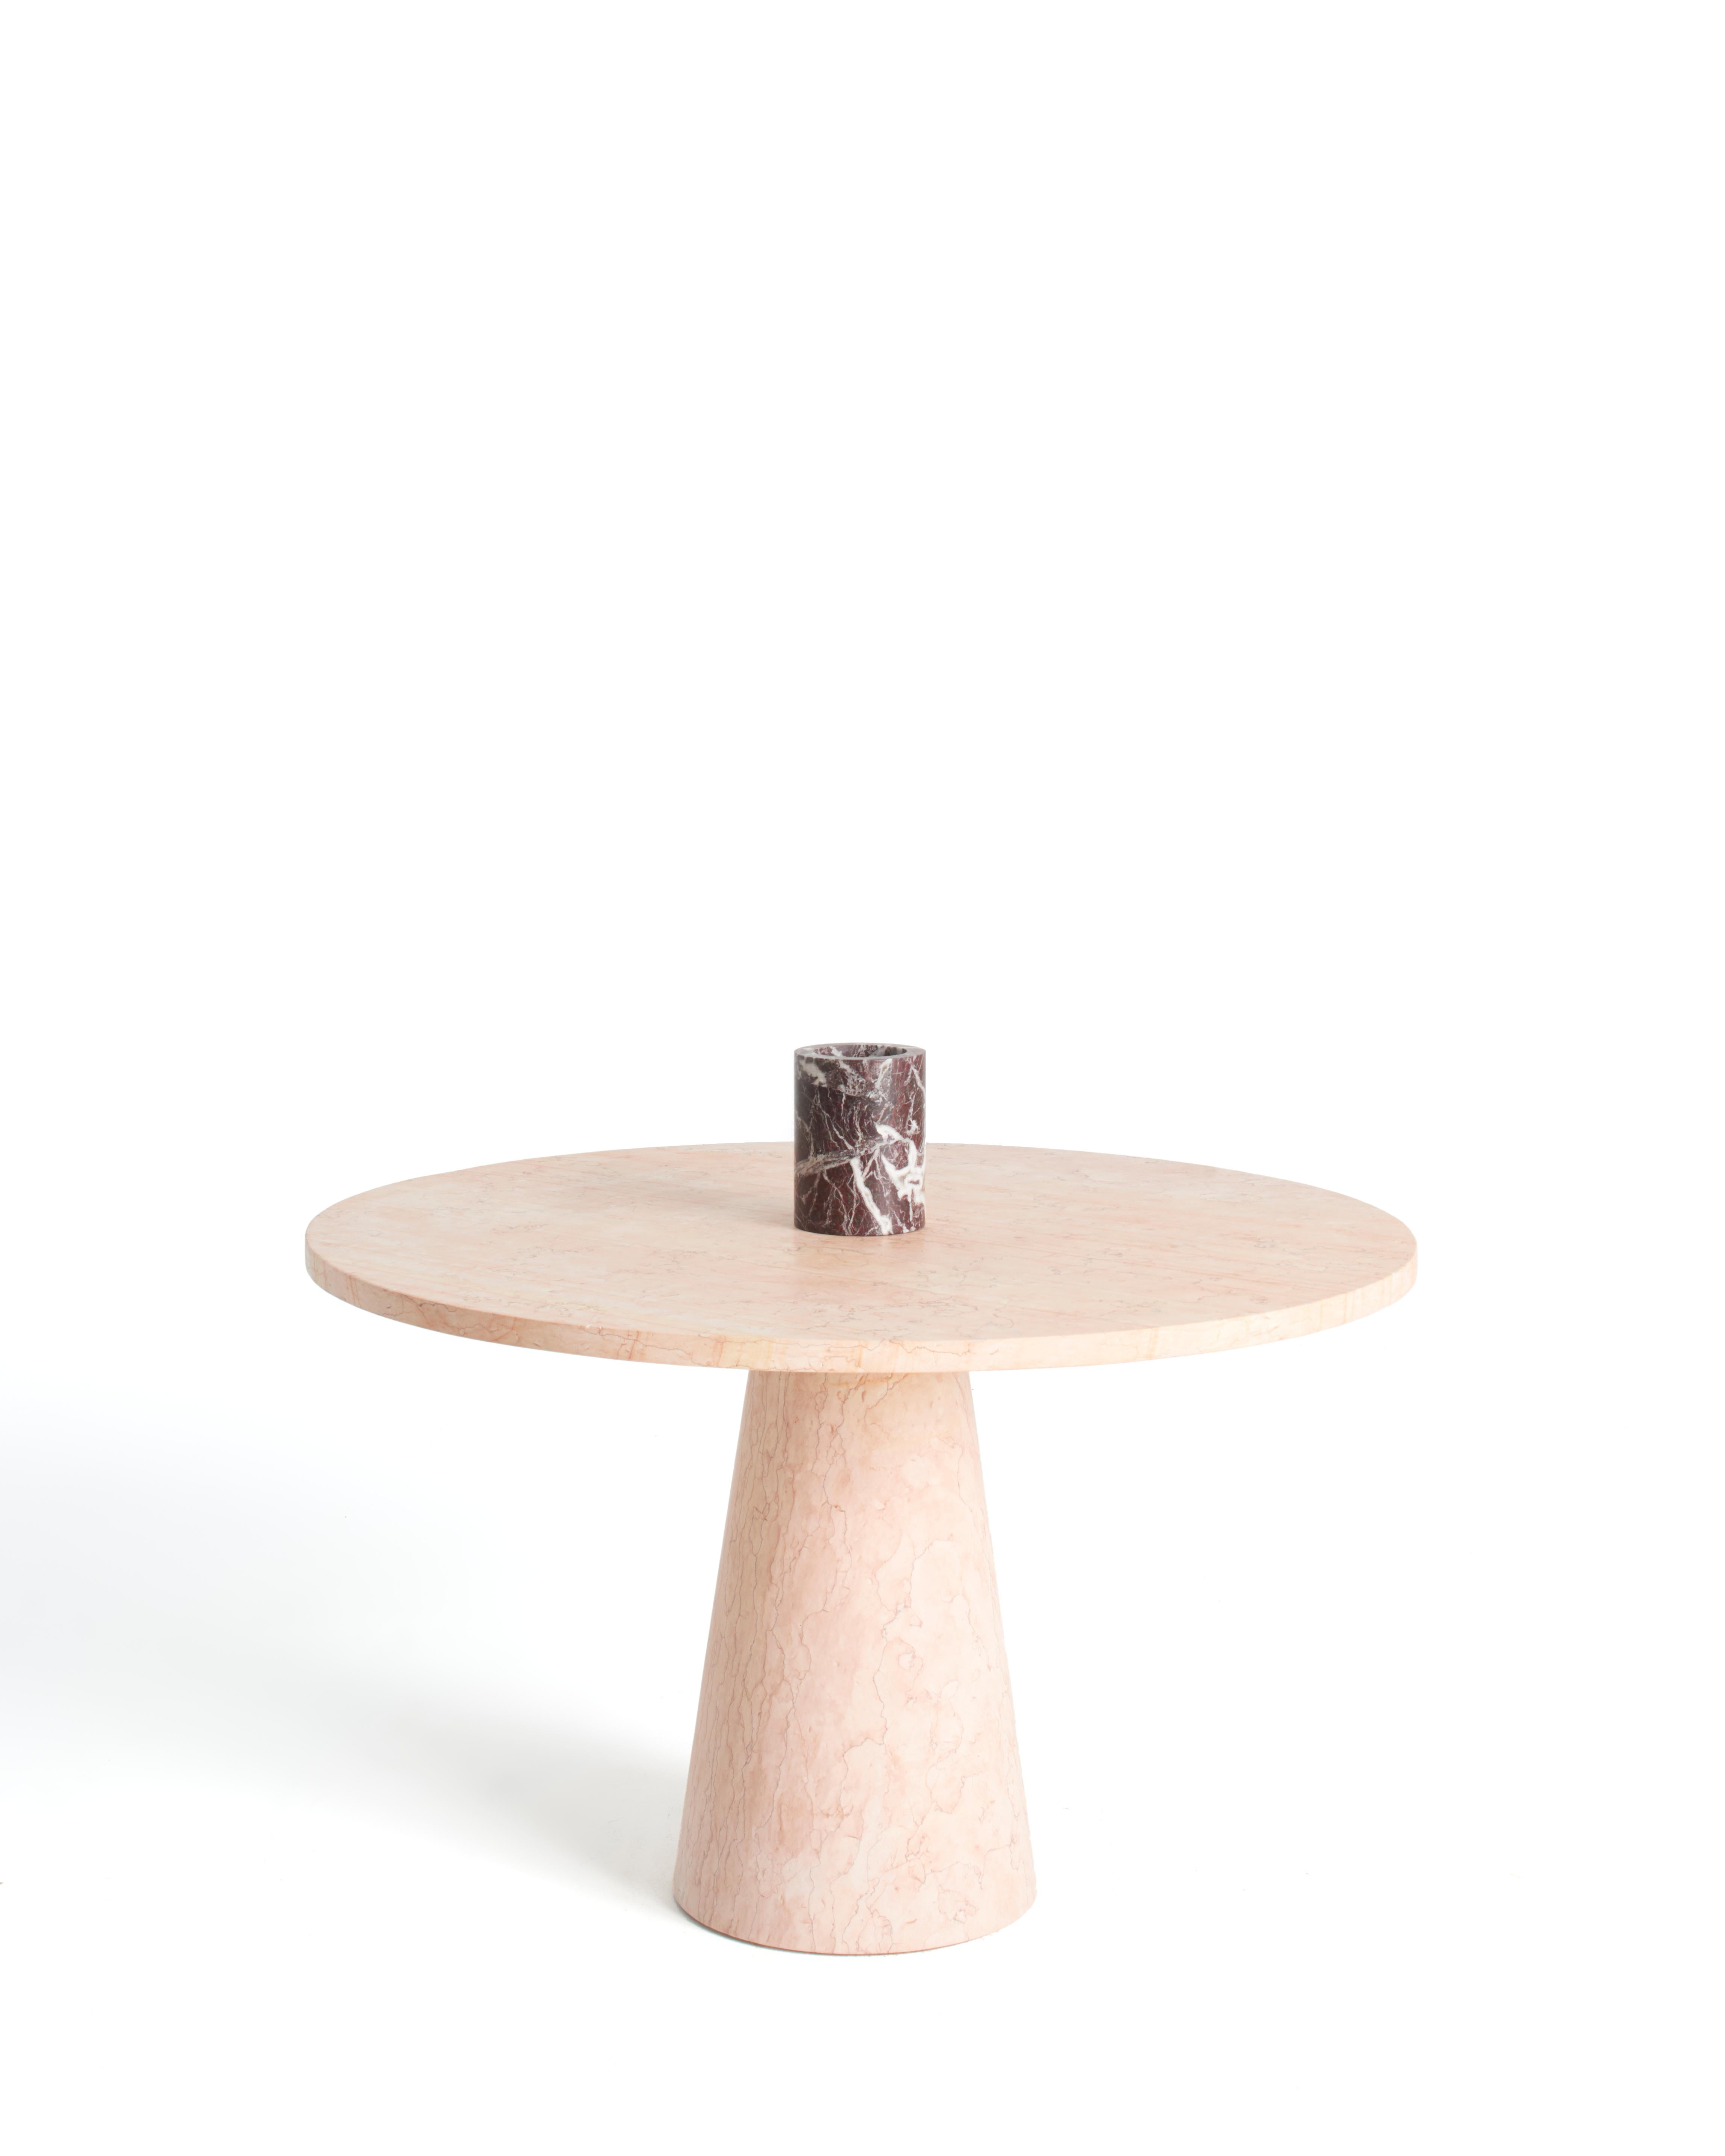 Pink marble dining table designed by Karen Chekerdjian, part of the Inside Out Collection - accessories (fruit bowl, candles, flower vases) tables in red and black marble. It can be customised with its accessories, sold separately. 

An endlessly